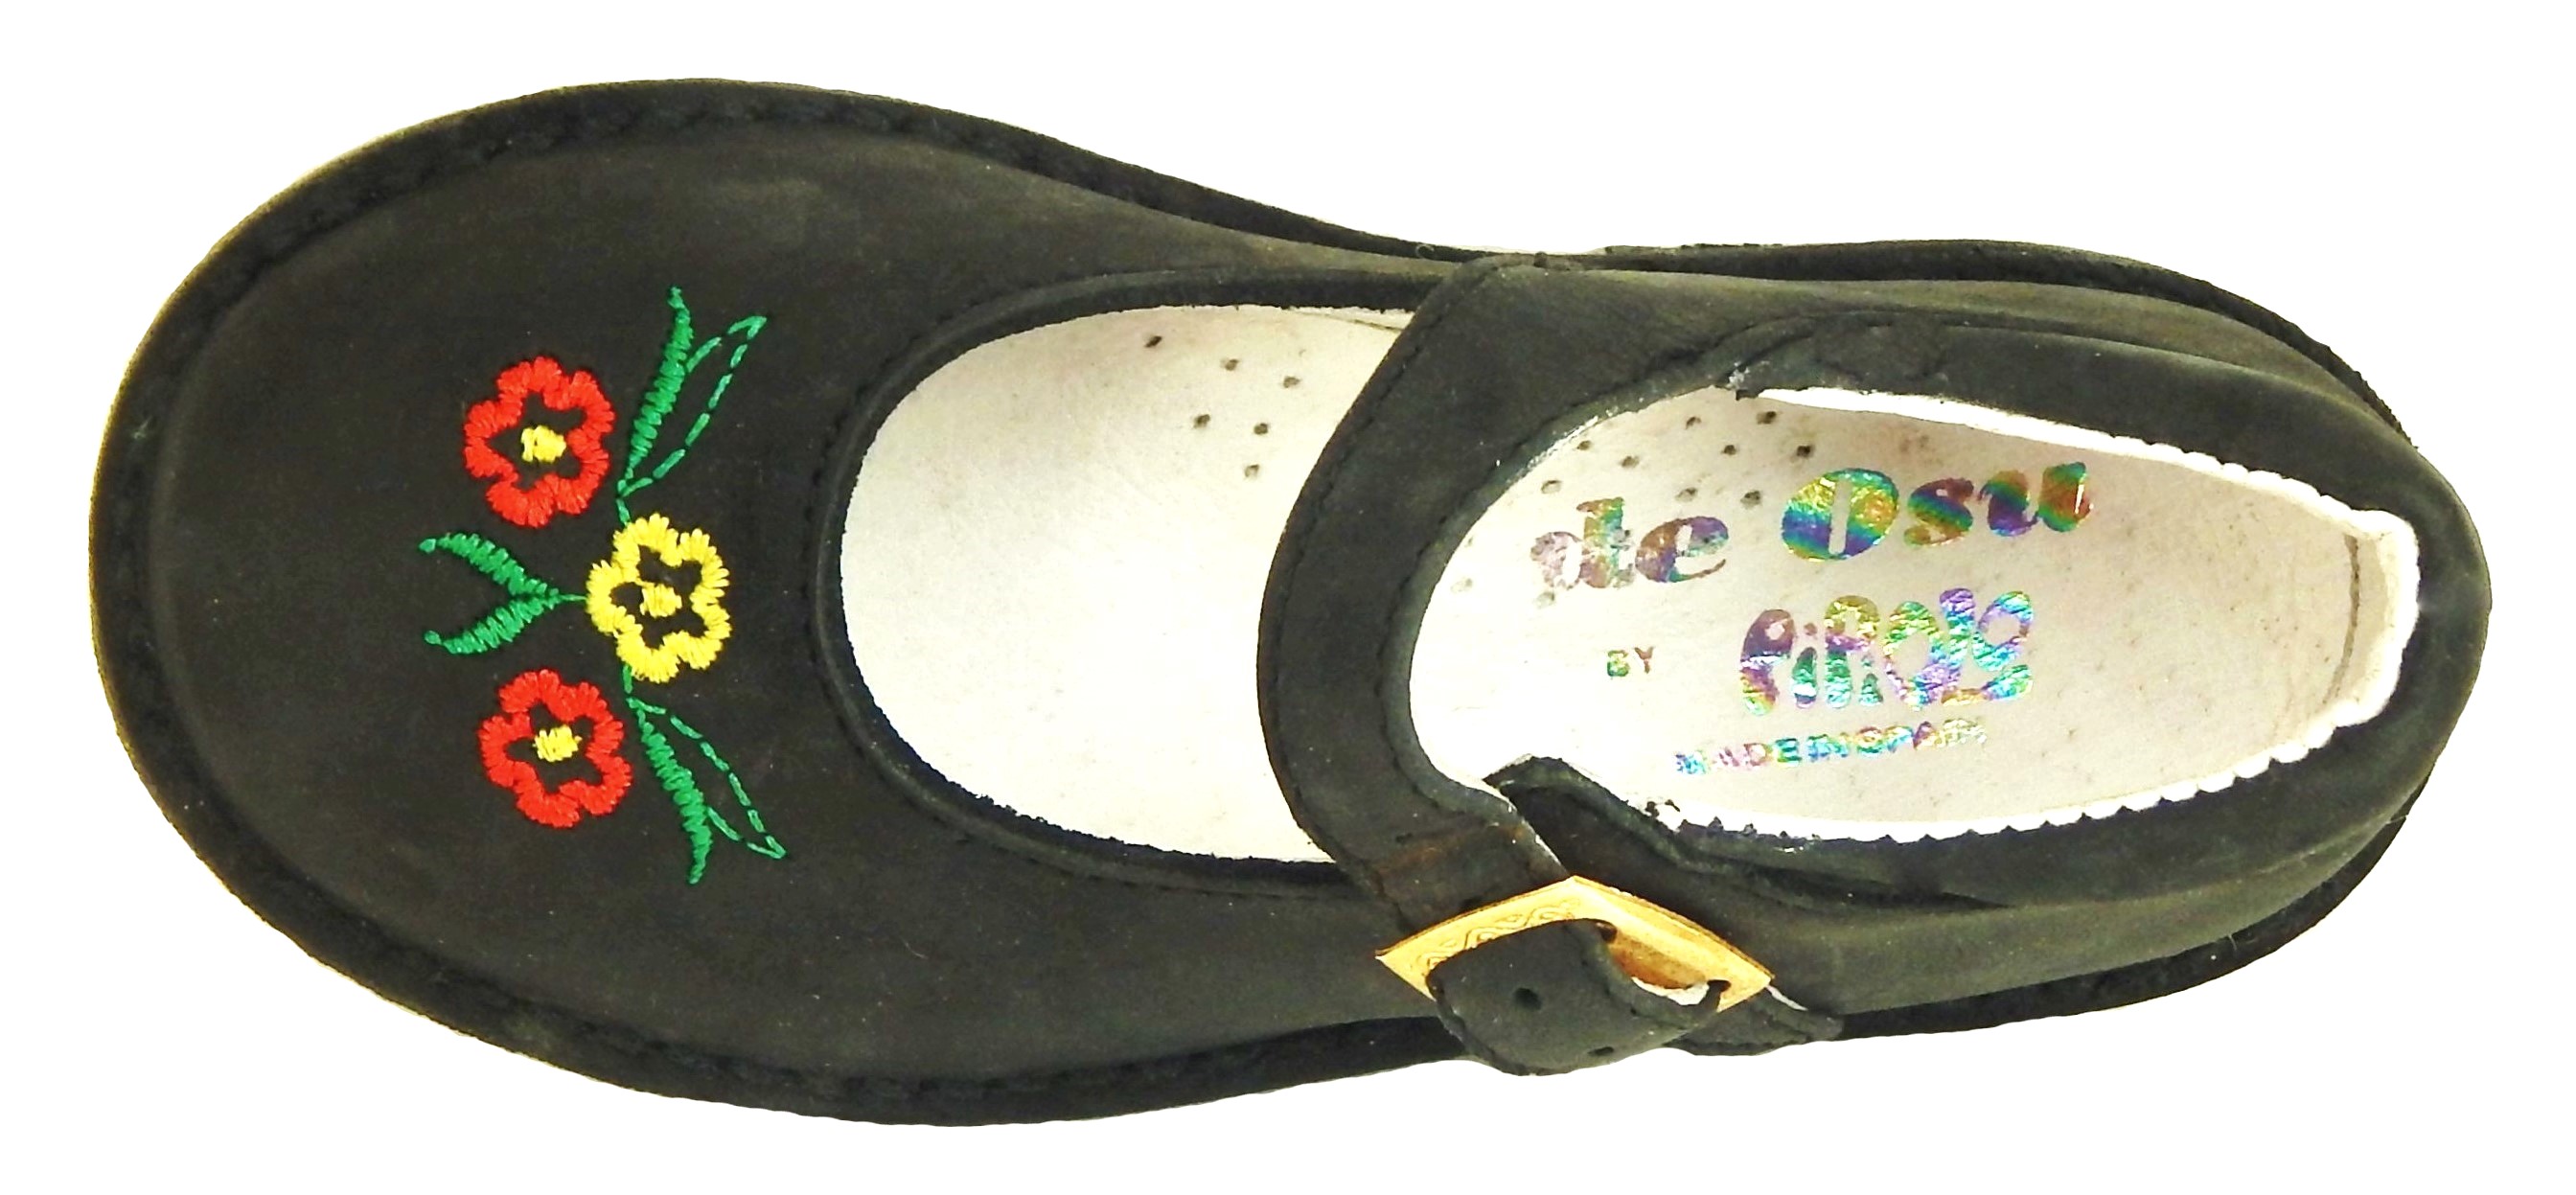 A-1229 - Black Flower Mary Janes